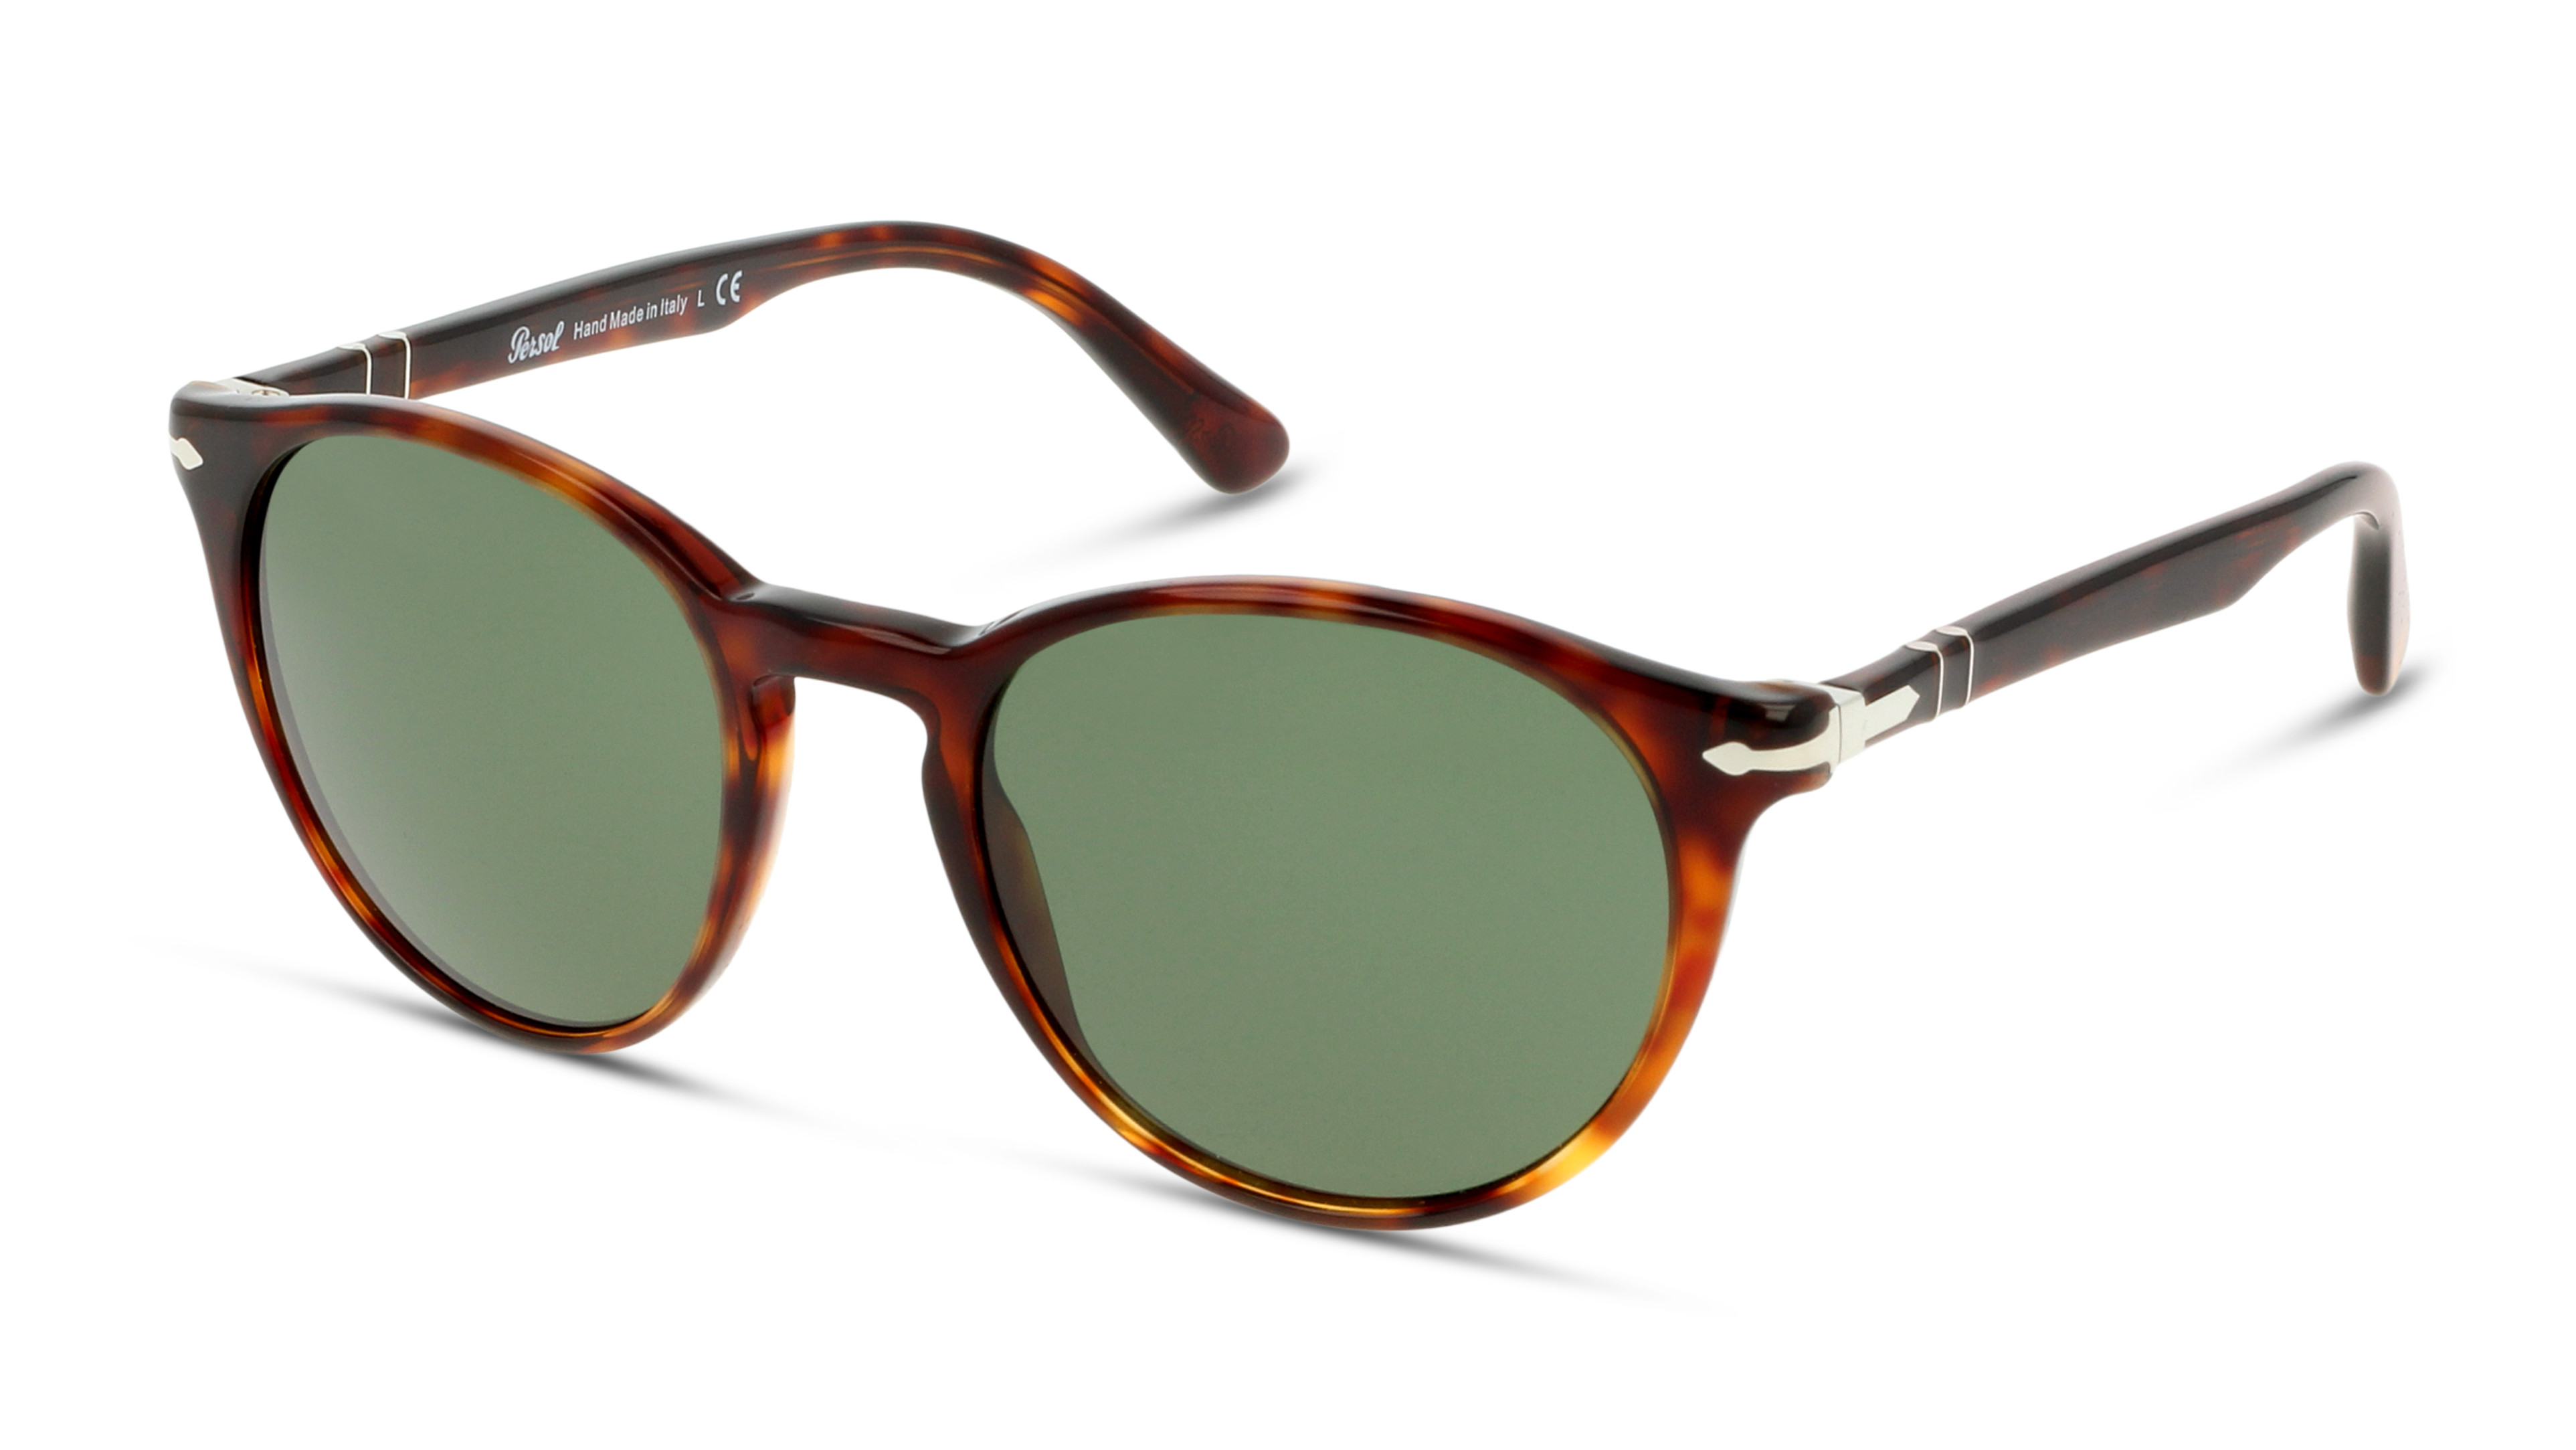 [products.image.angle_left01] Persol 0PO3152S 901531 Sonnenbrille